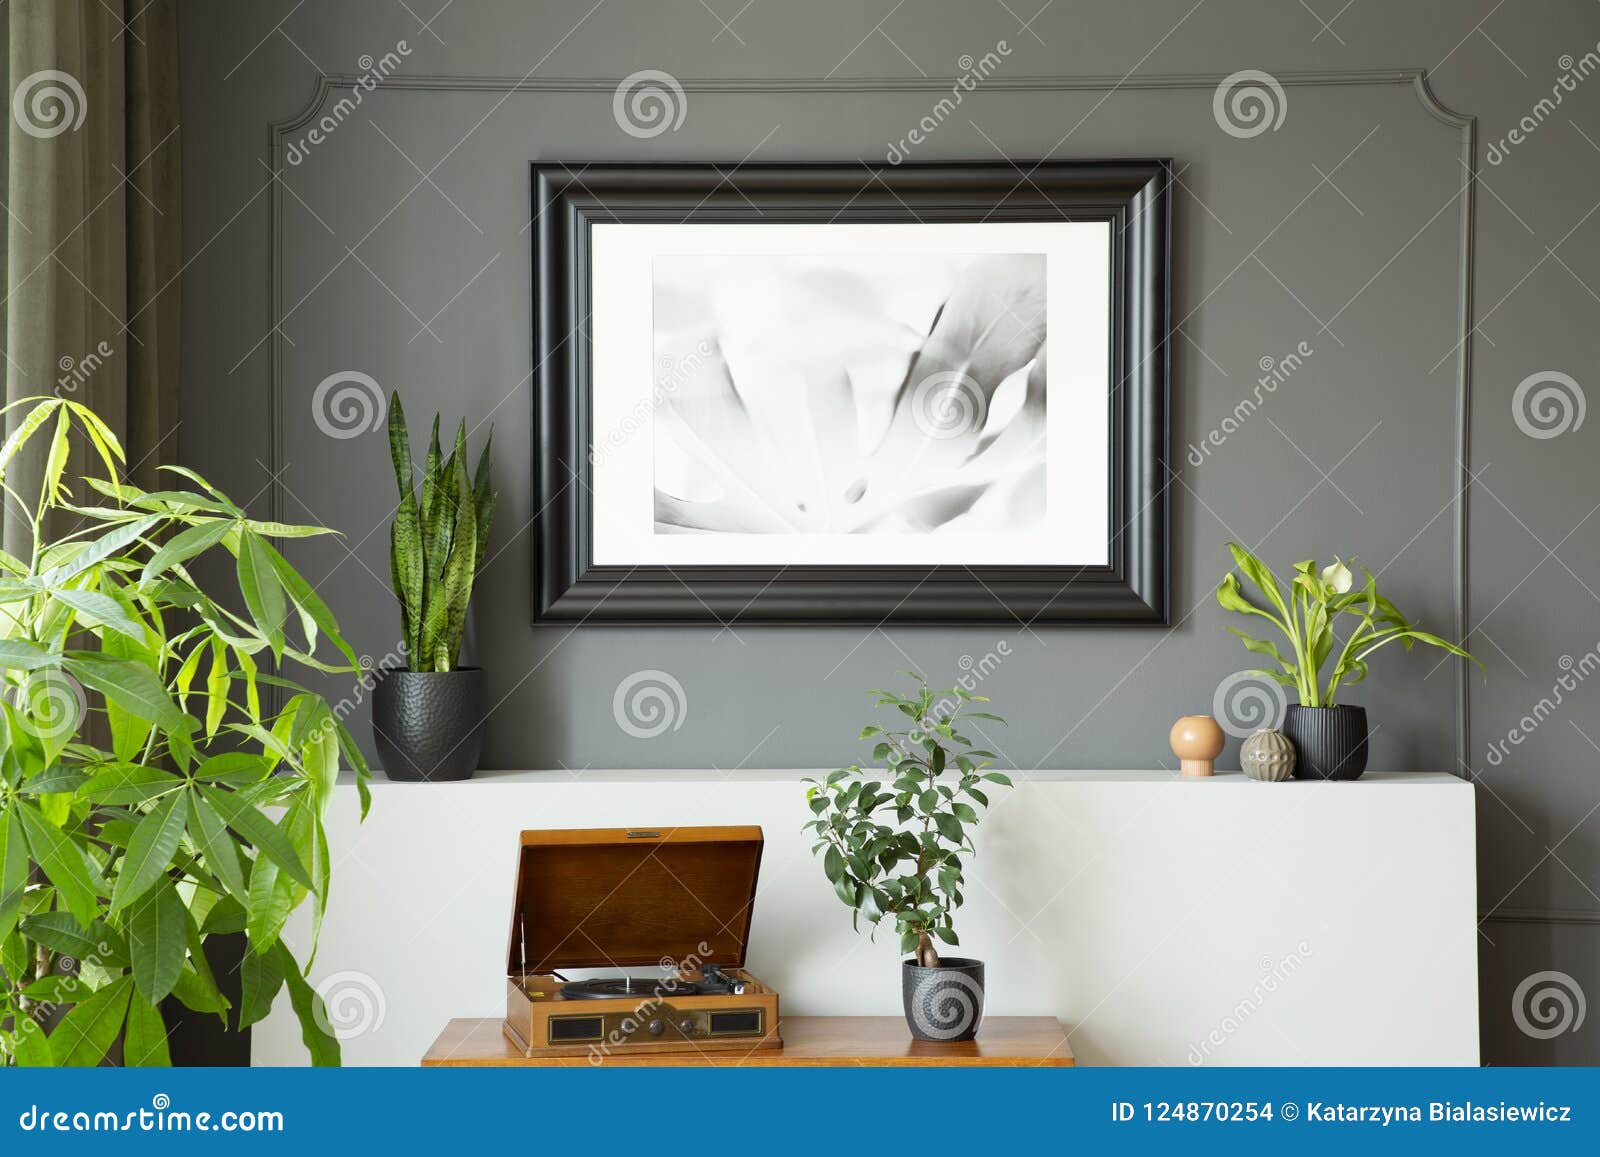 Poster On Grey Wall Above Record Player And Plants In Retro Living